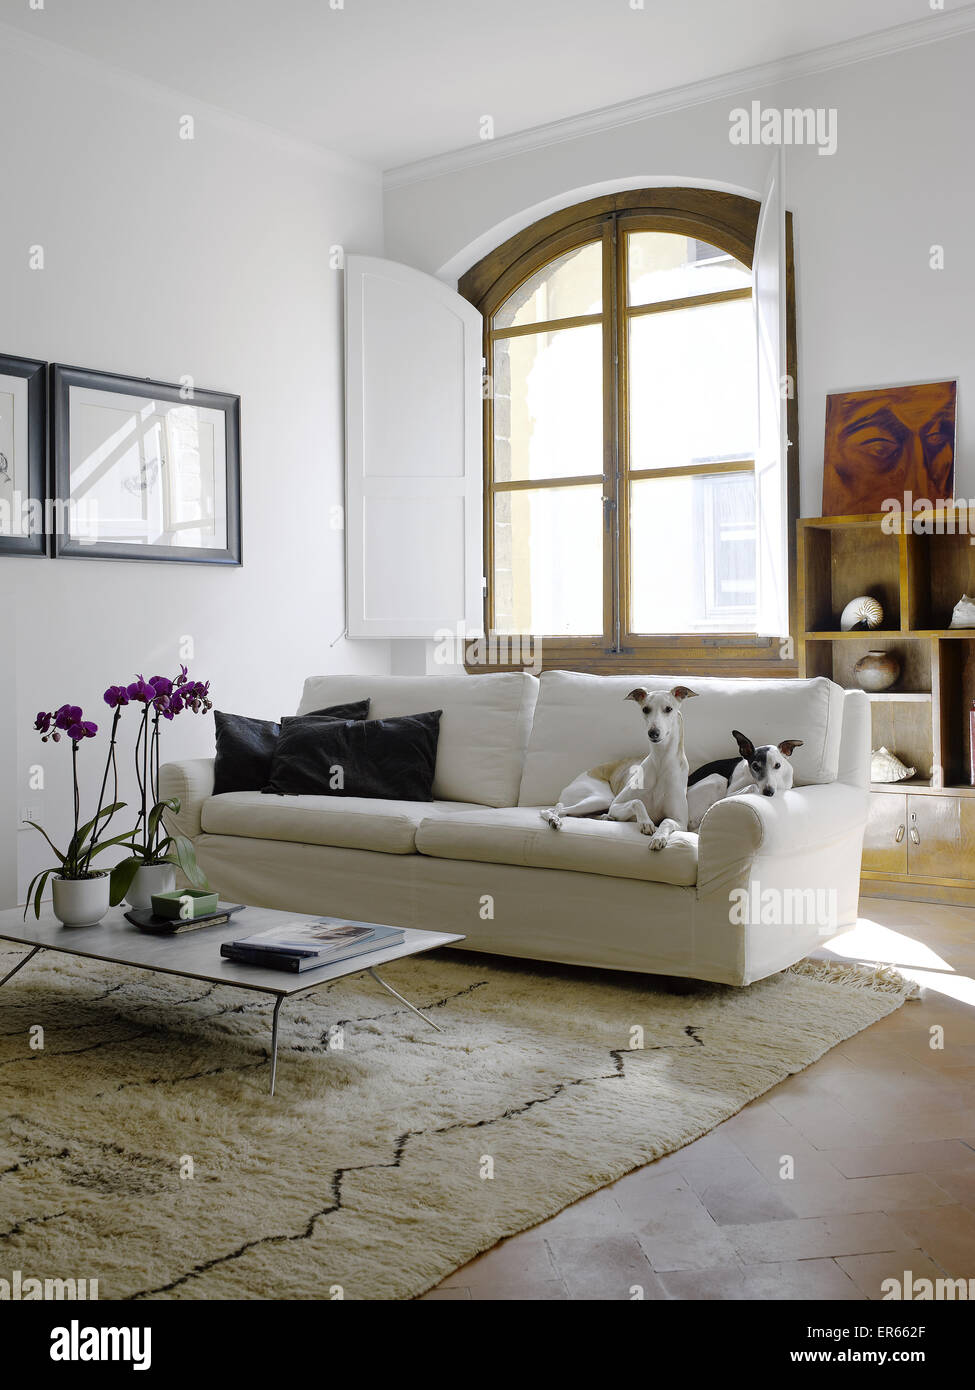 Interior of a living room with two greyhounds or whippet dogs lied on the sofa Stock Photo